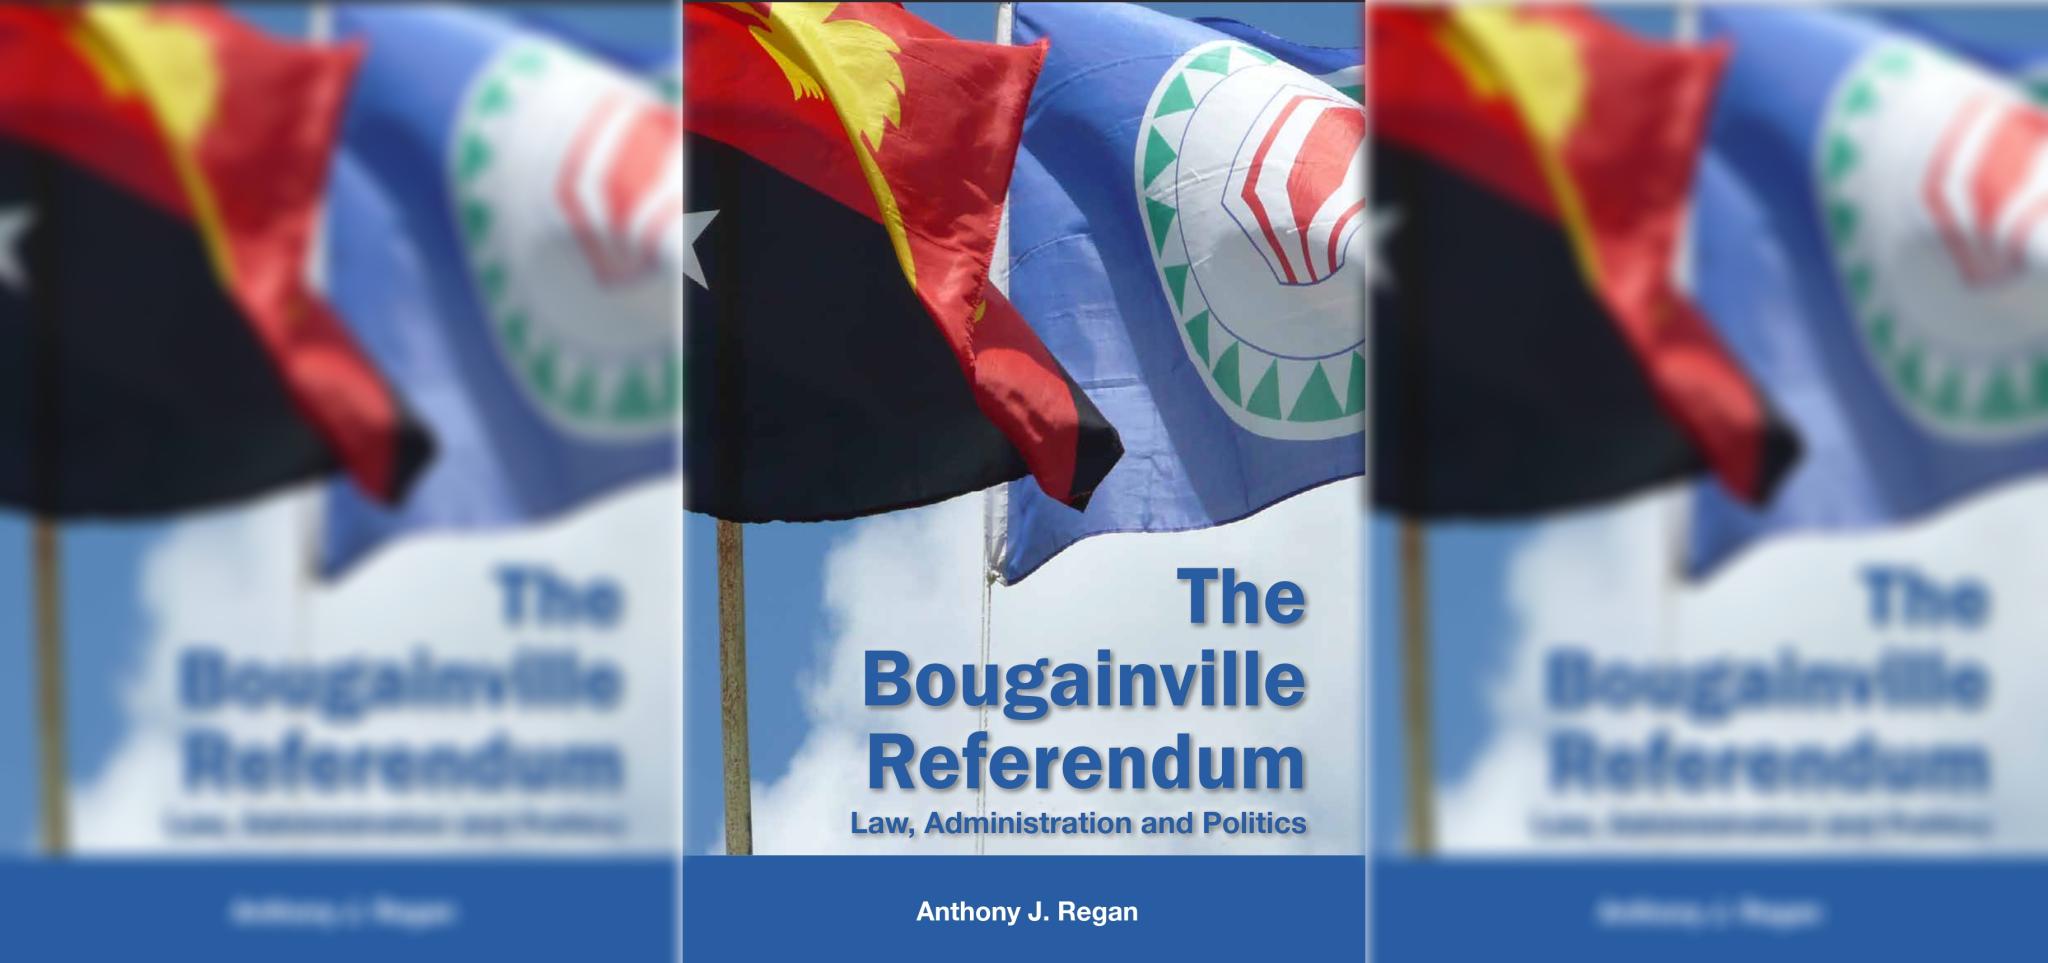 The Bougainville Referendum: Law, Administration and Politics